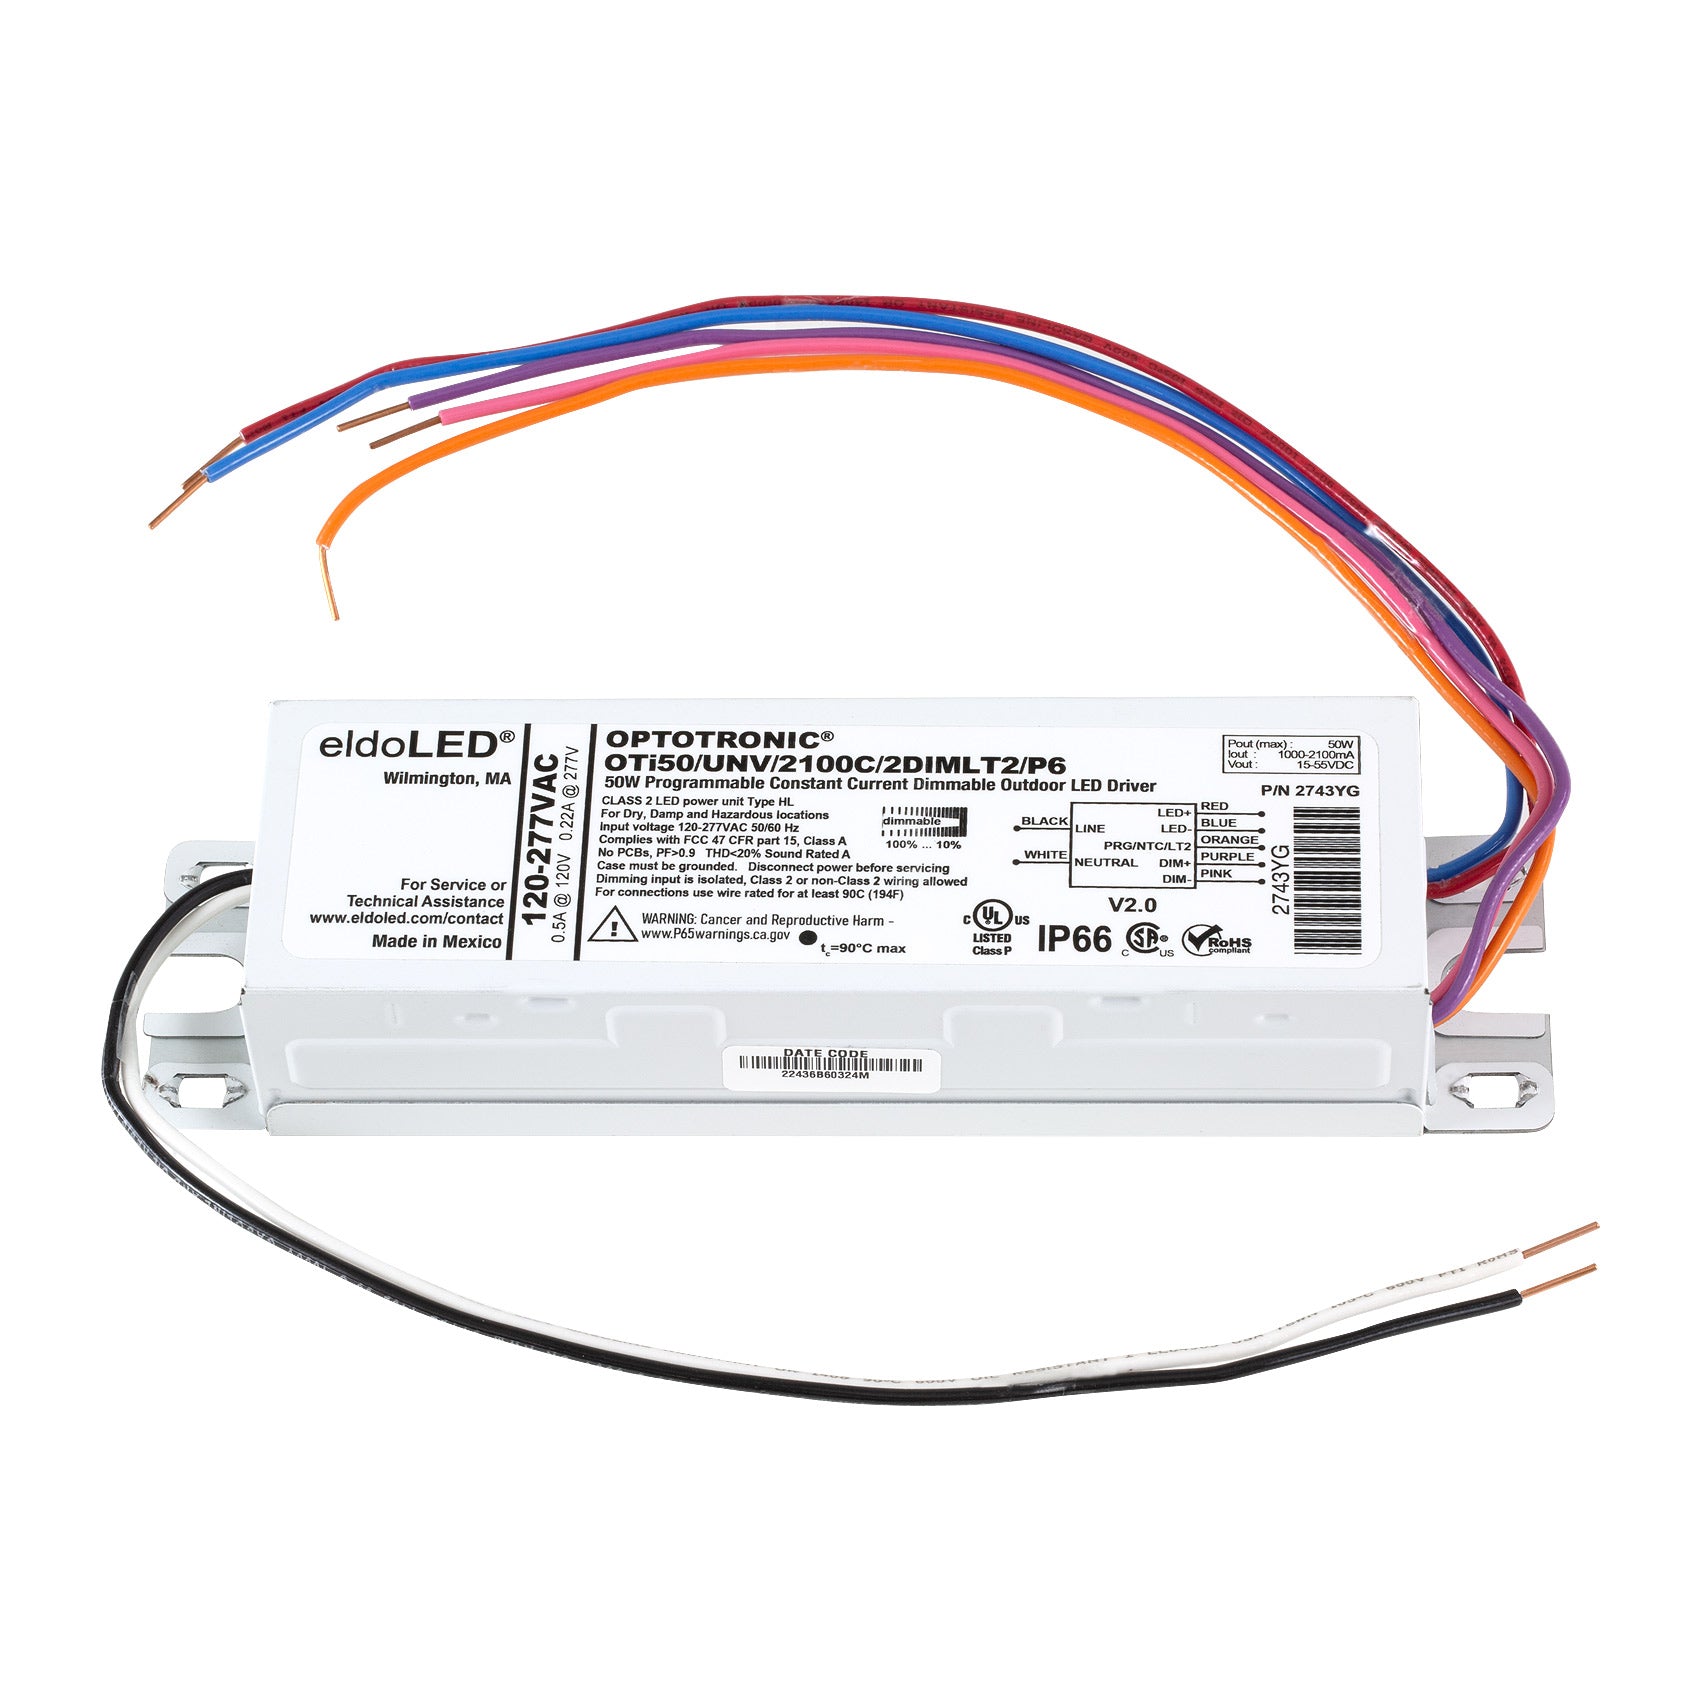 eldoLED *2743YG OPTOTRONIC 50W Constant Current 0-10V Dimmable LED